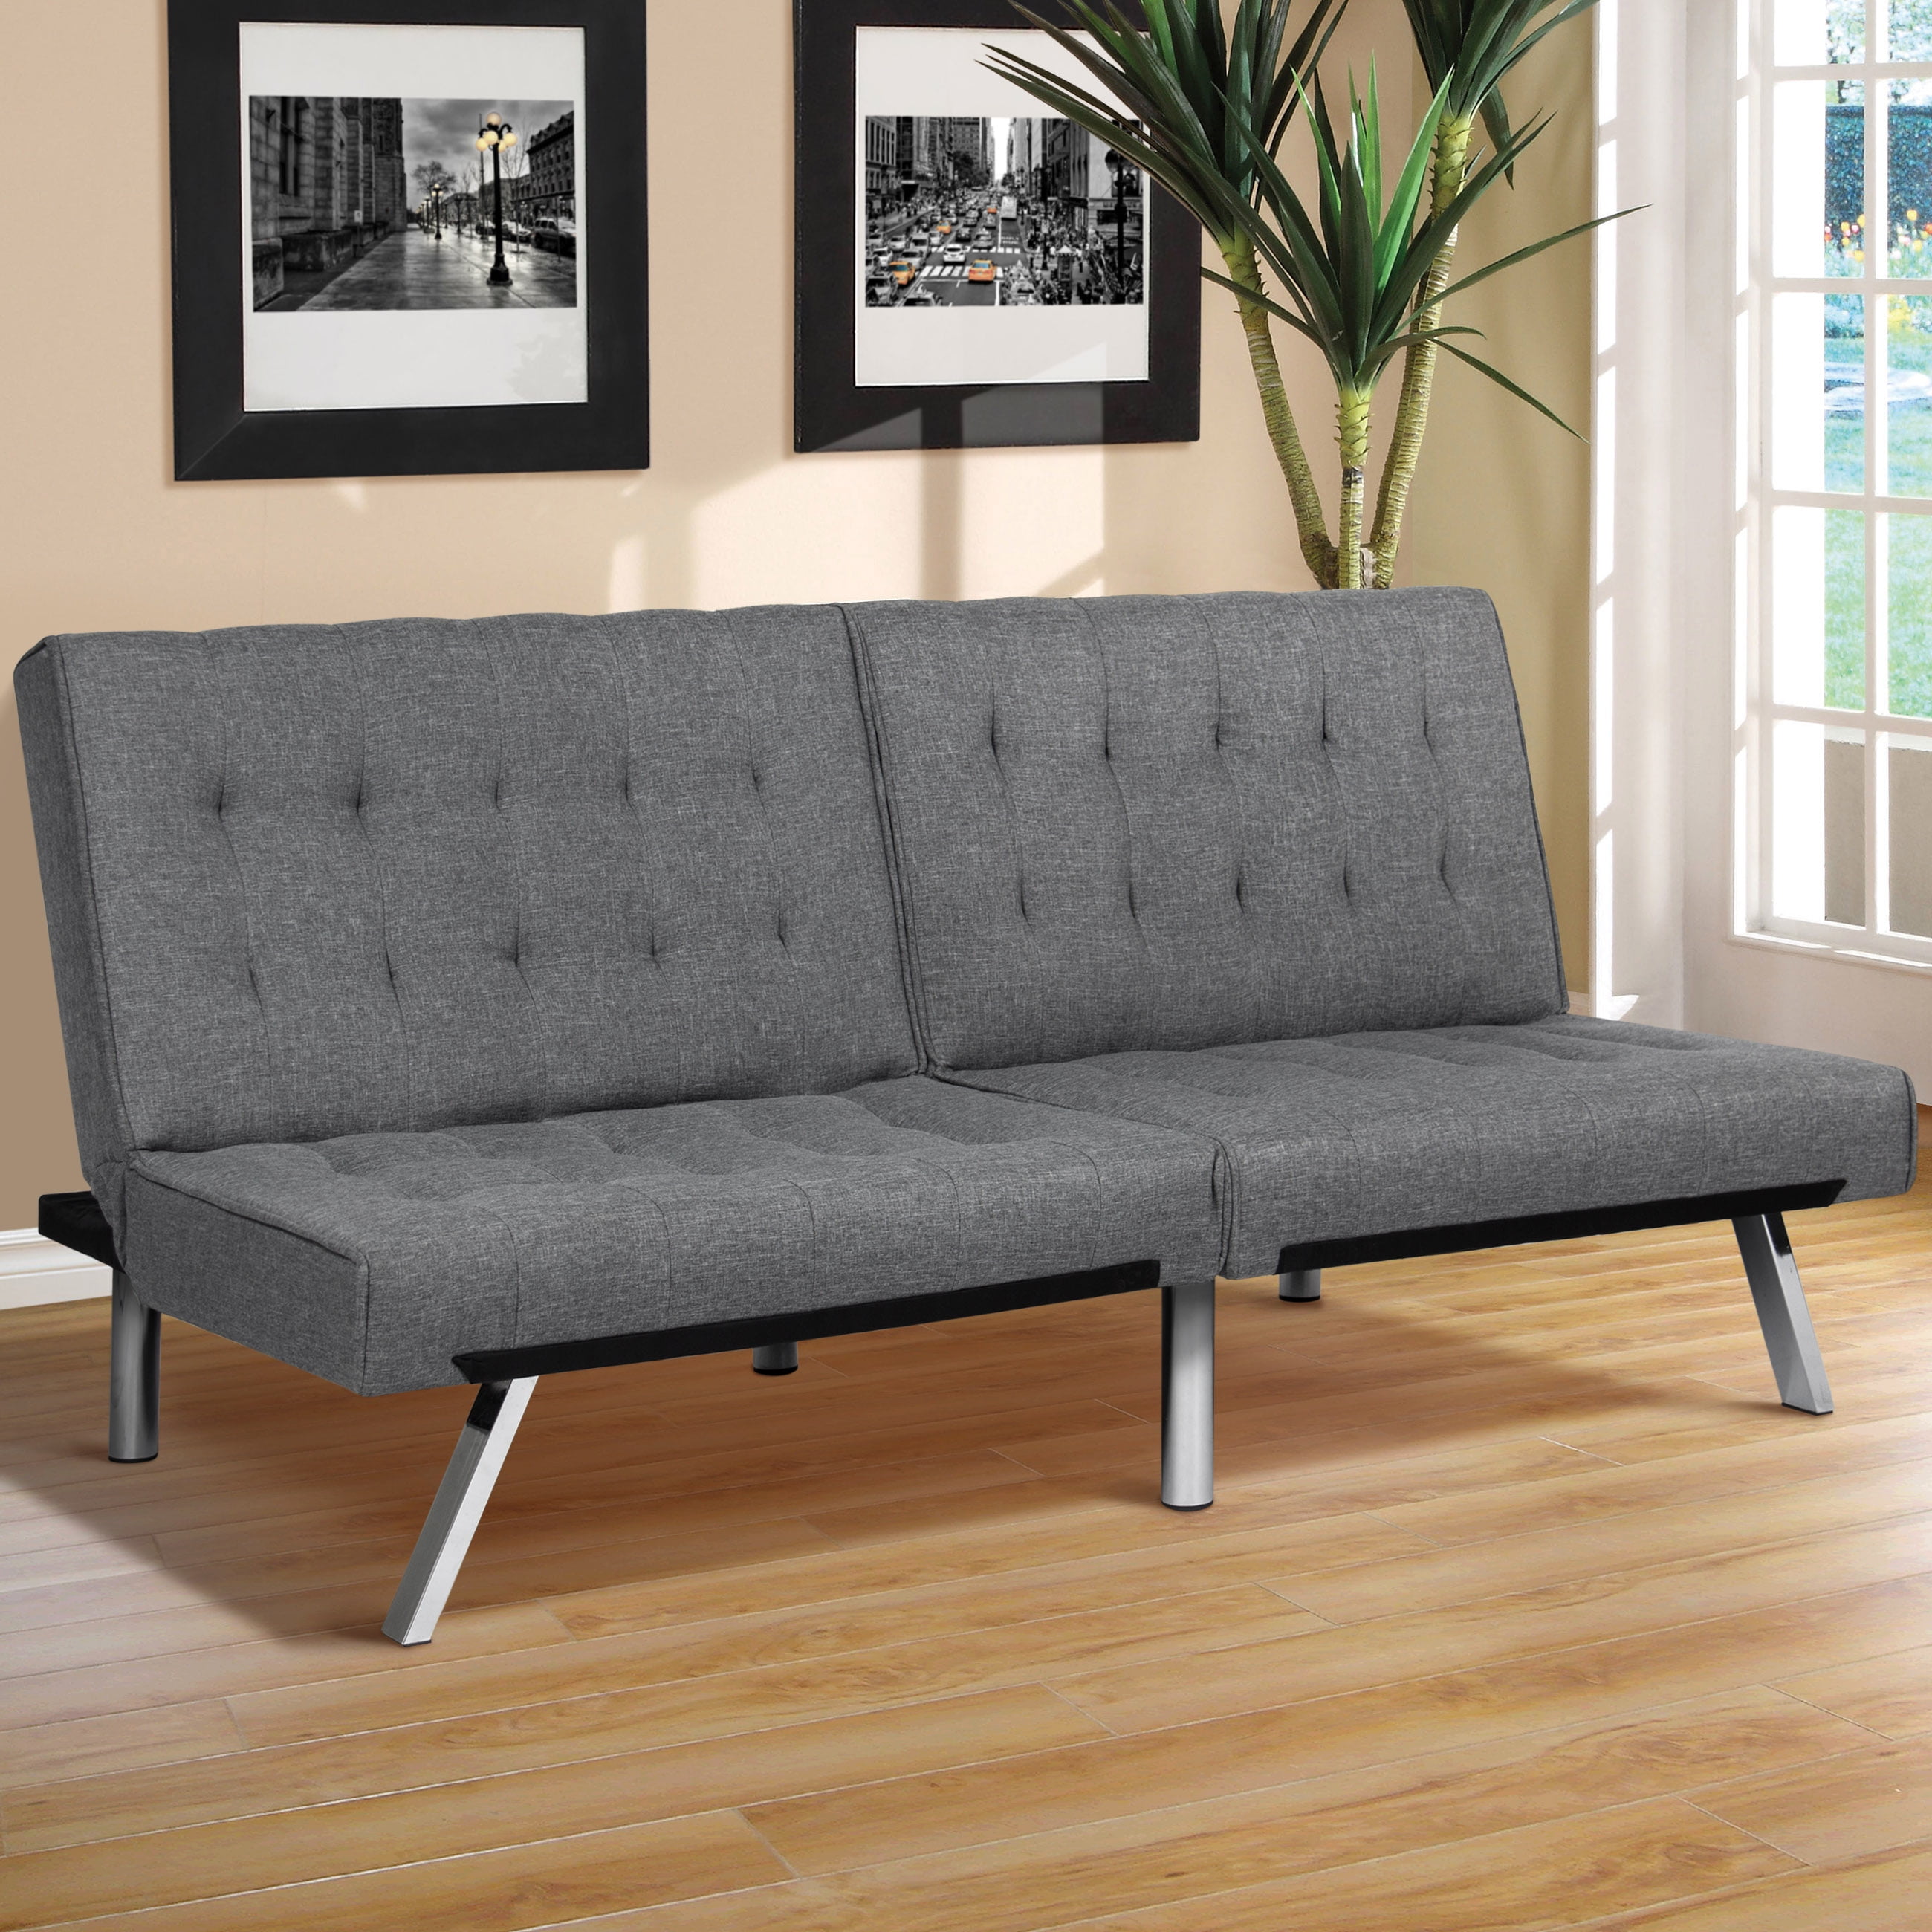 Best Choice Products Modern Futon Sofa Bed Fold Up & Down Couch